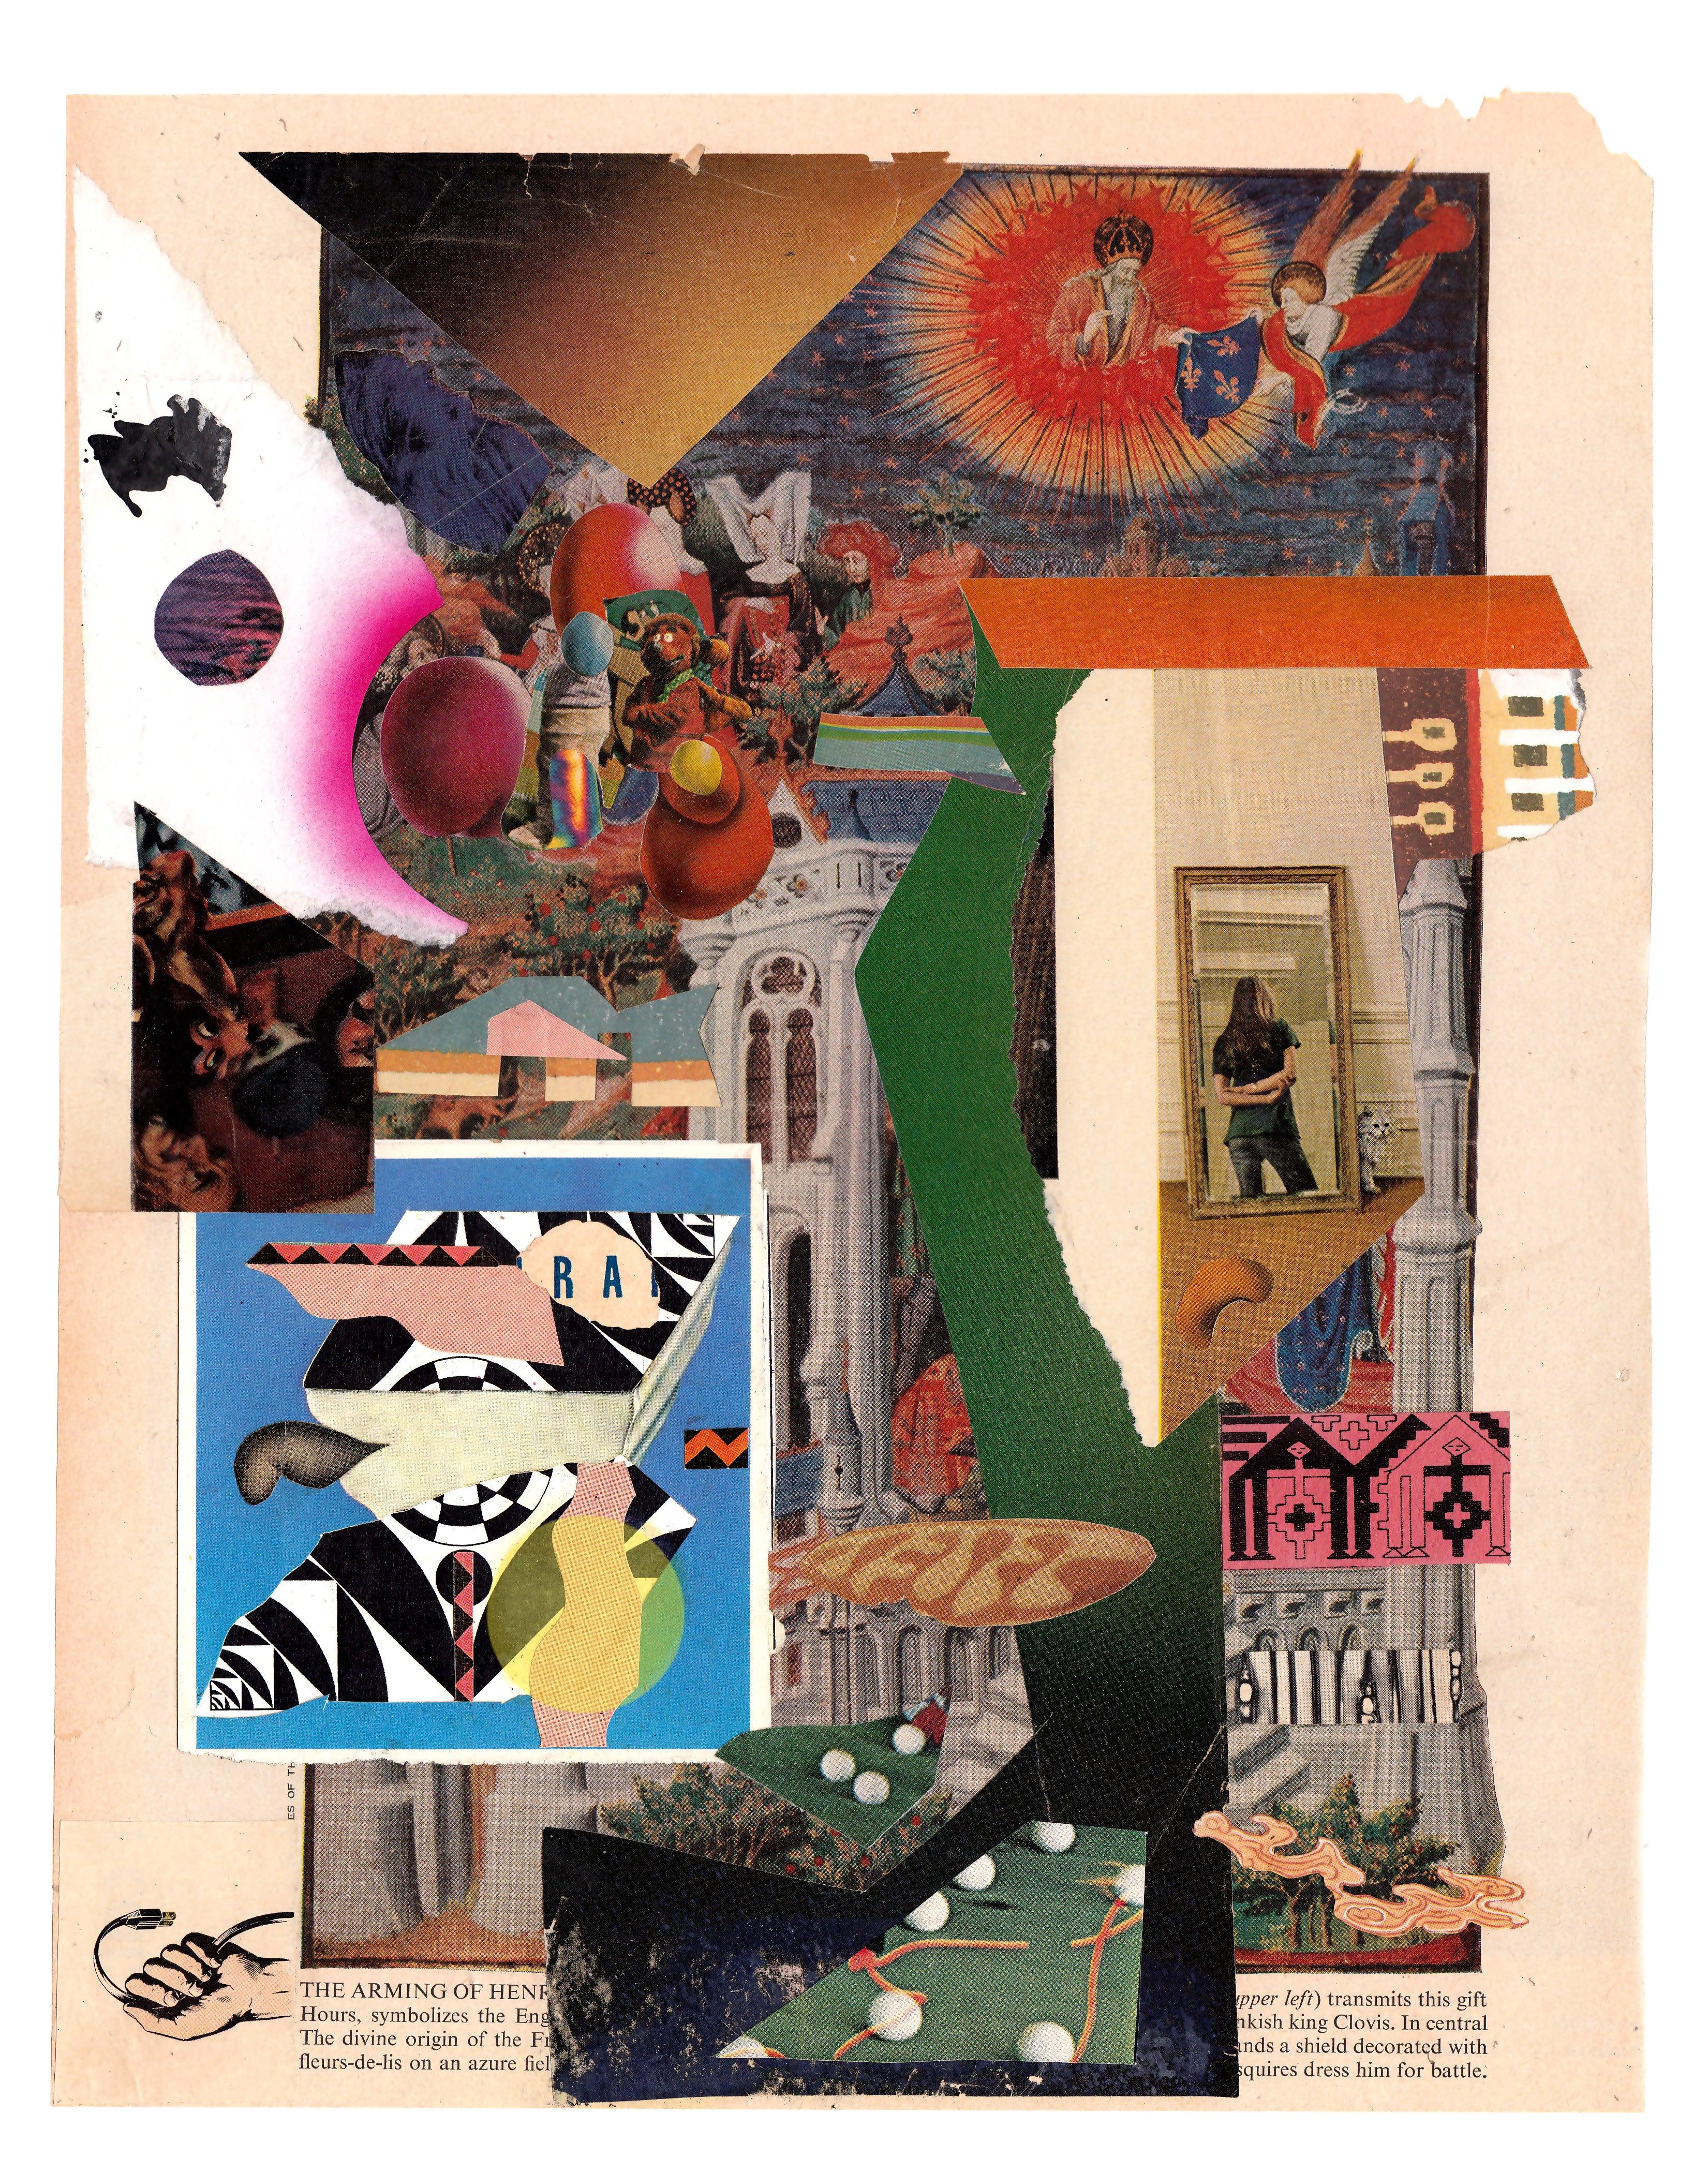 End Of The Line For Kahluafish - contemporary collage, found images, colourful - Mixed Media Art by Andrew Zukerman